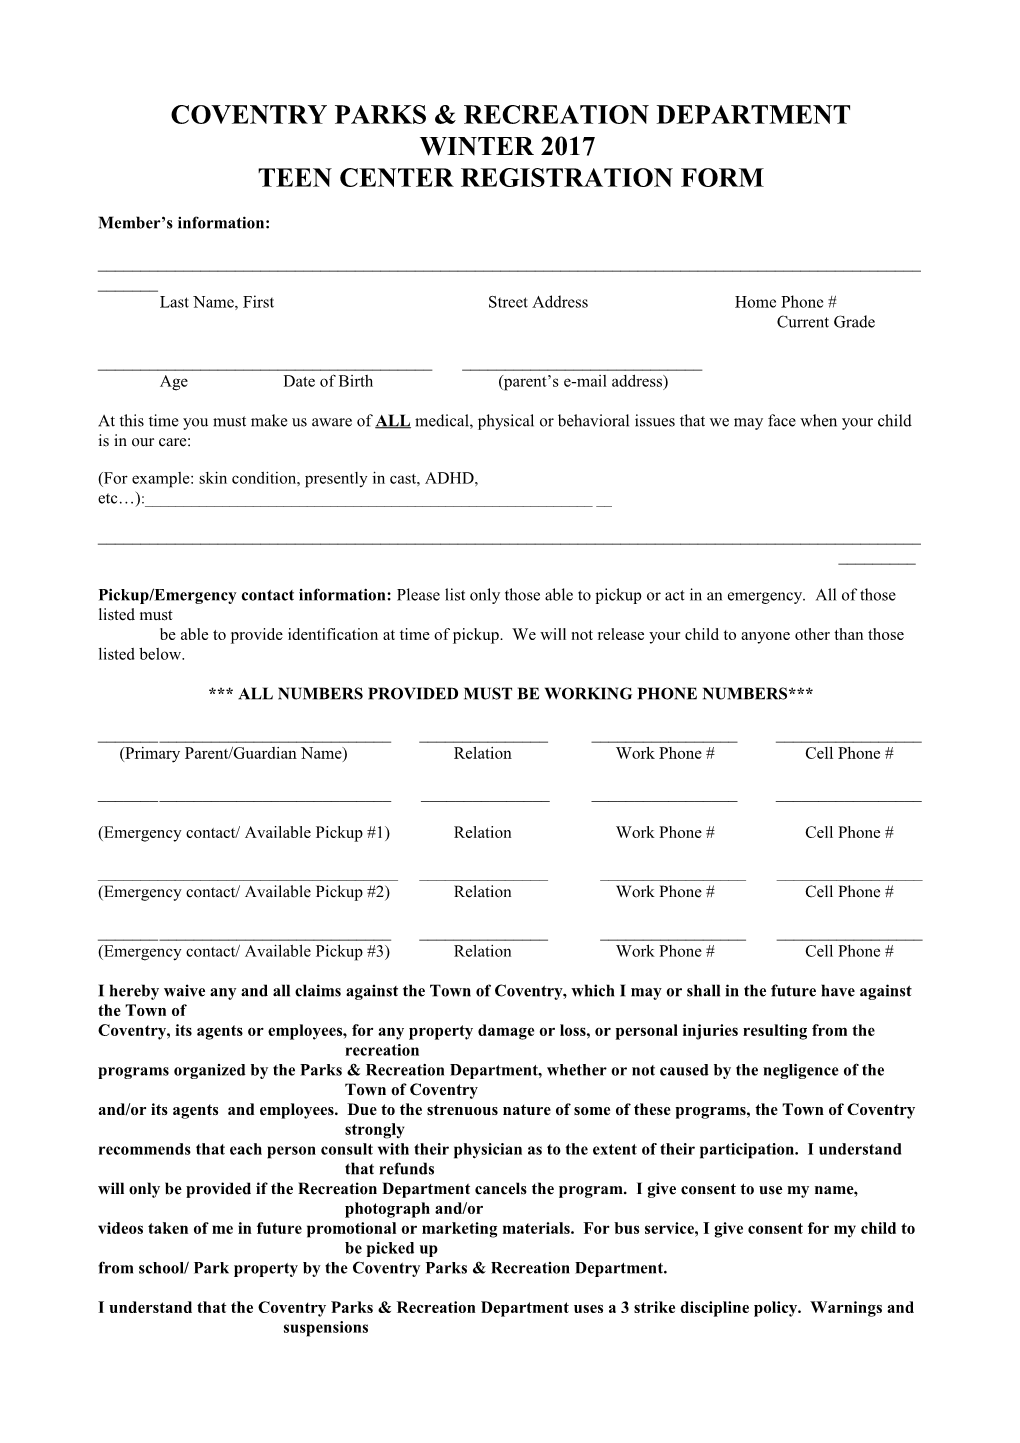 Coventry Recreation - Registration Form